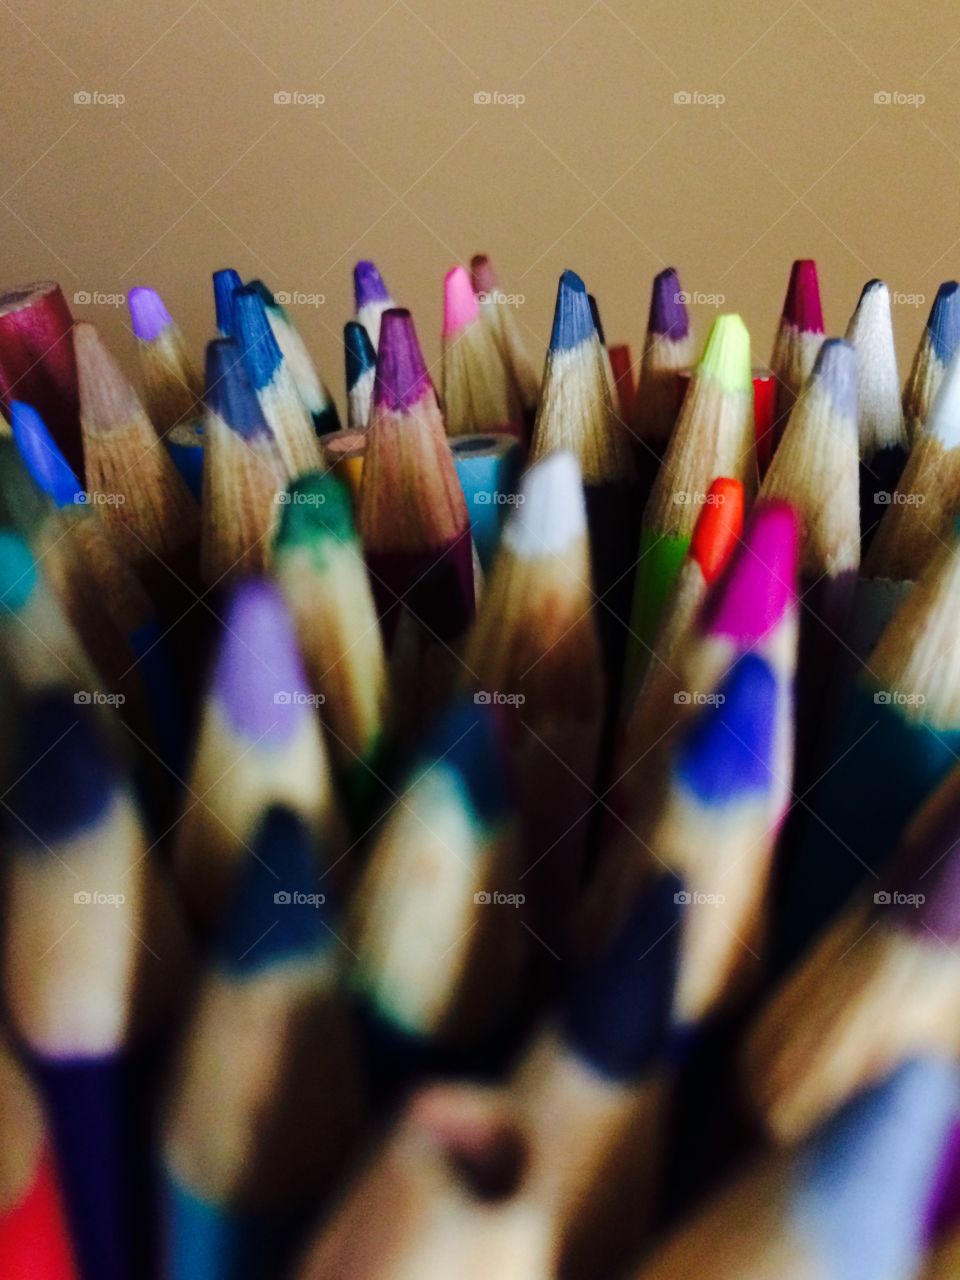 Extreme close-up of colored pencils